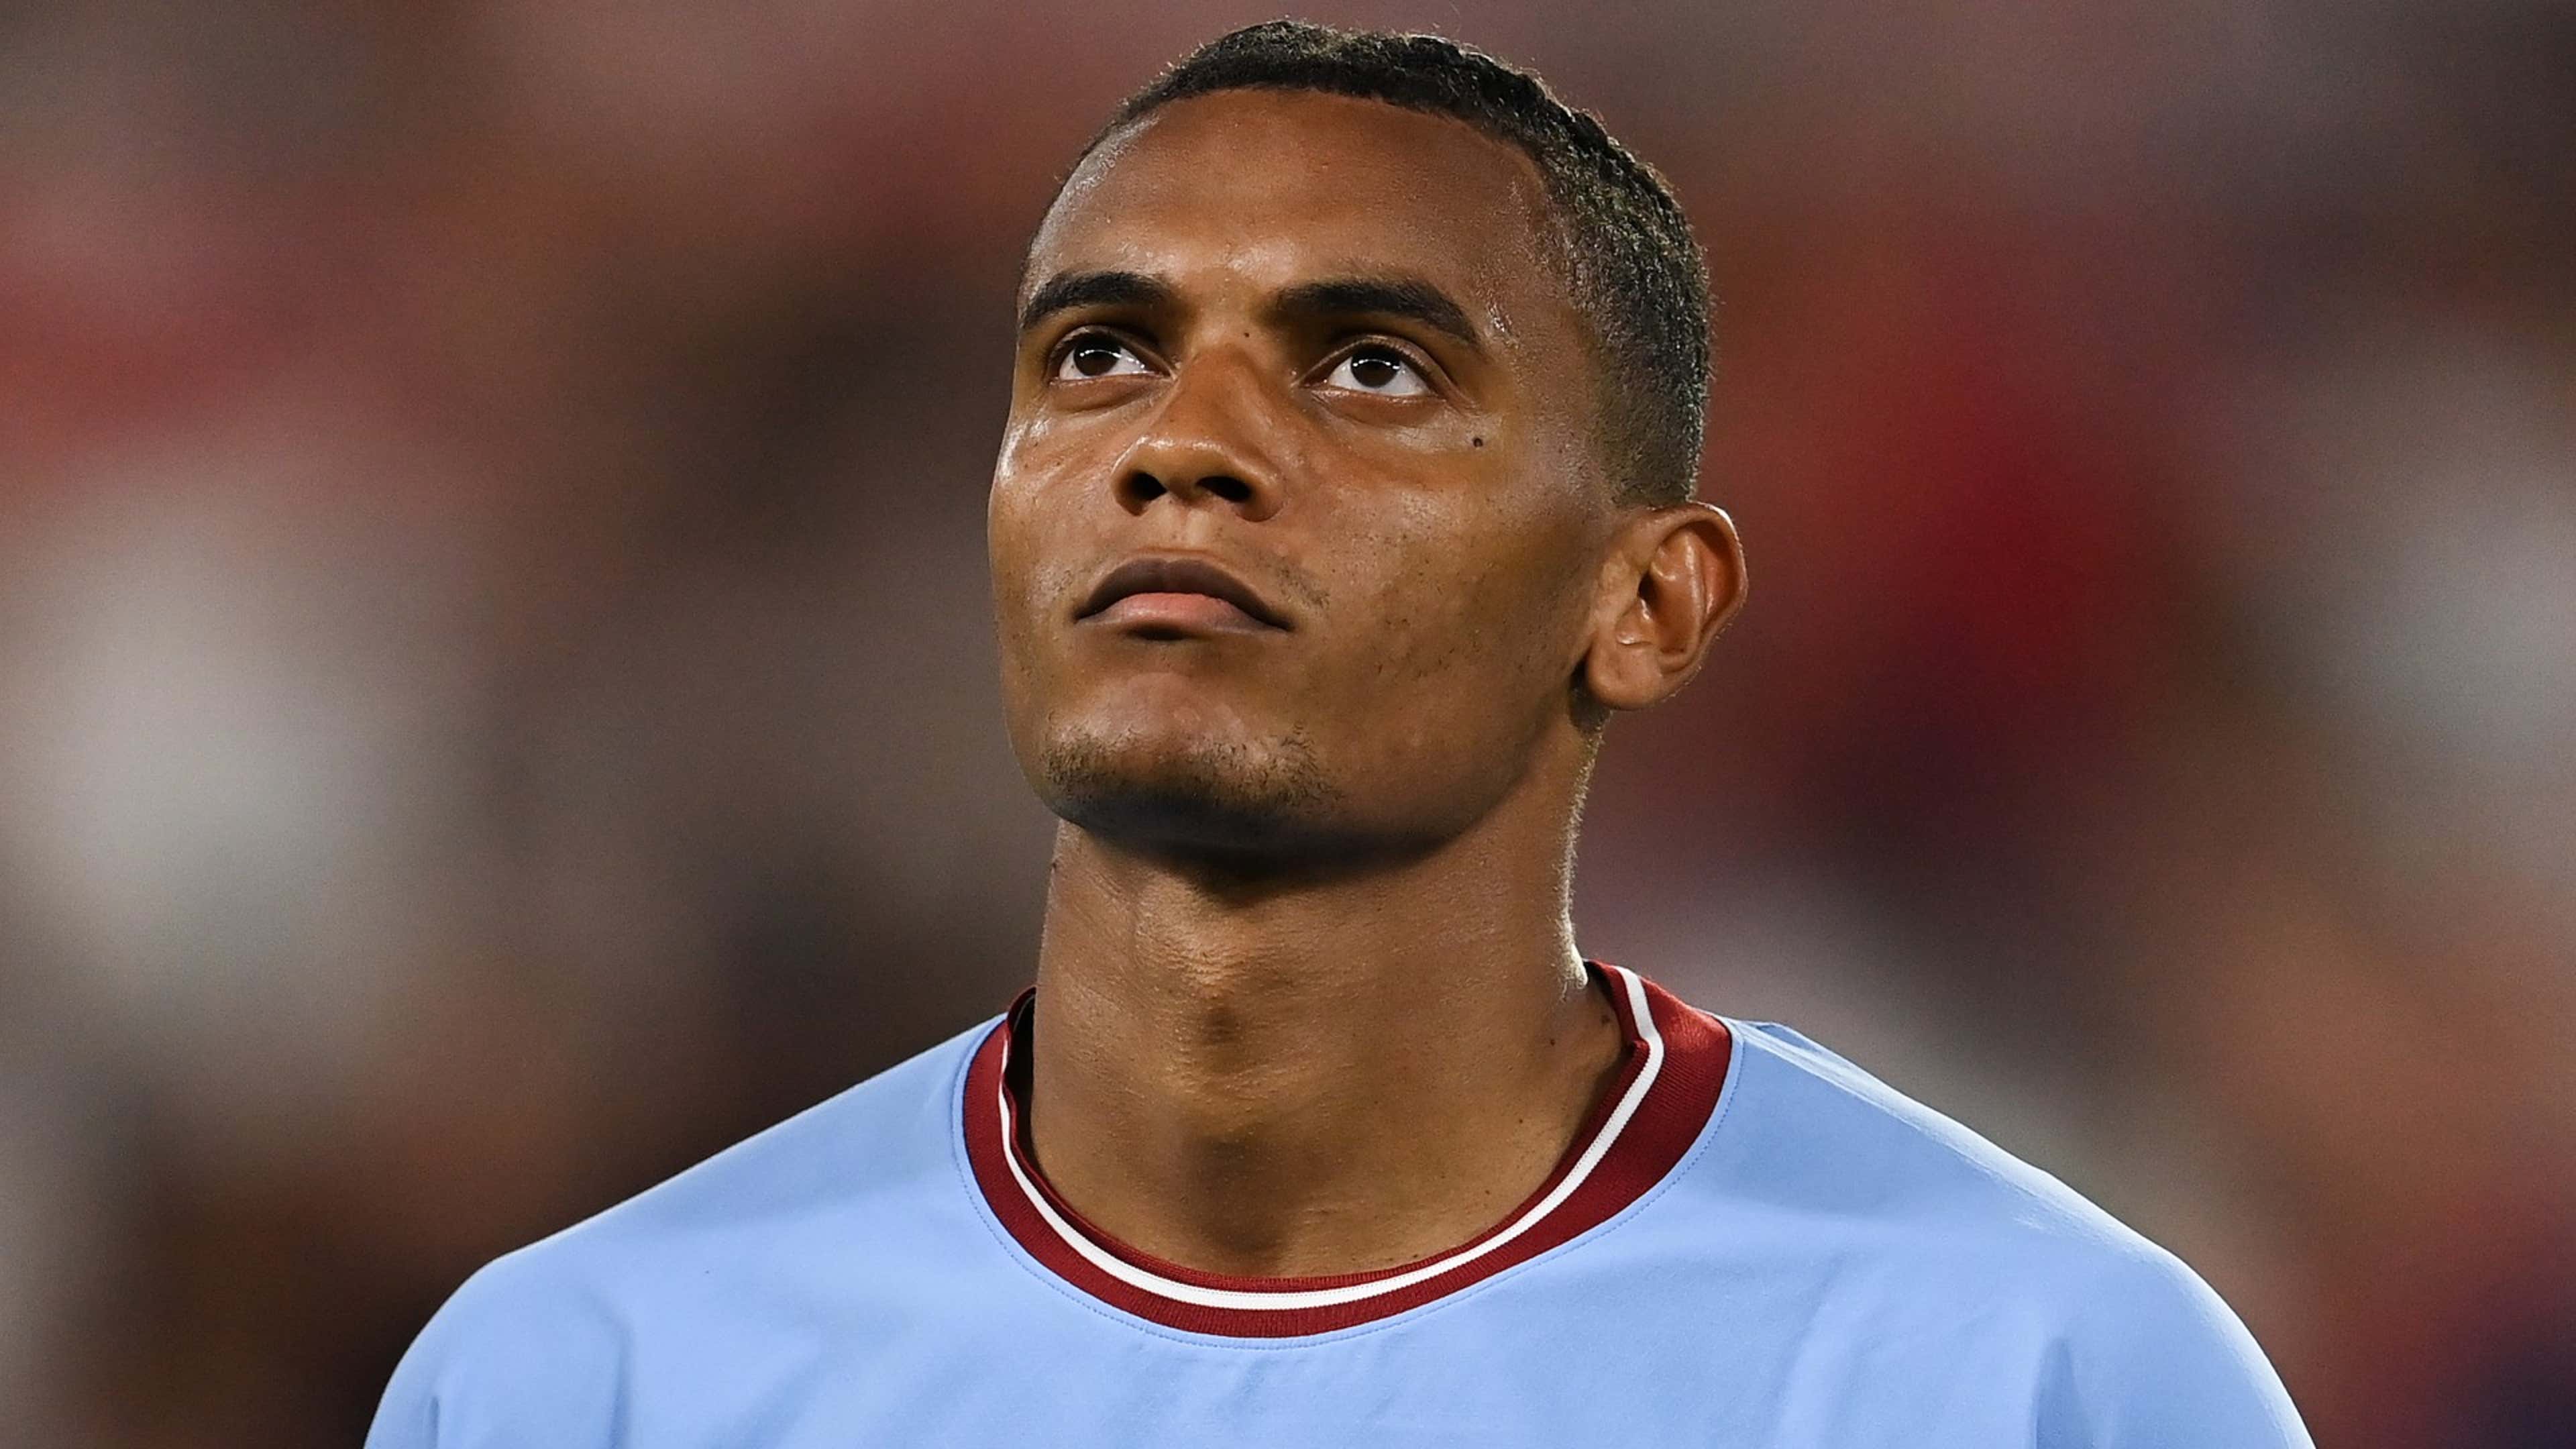 He was absolutely perfect' - Akanji earns rave reviews from Guardiola who  praises £15m 'gift' for Man City | Goal.com